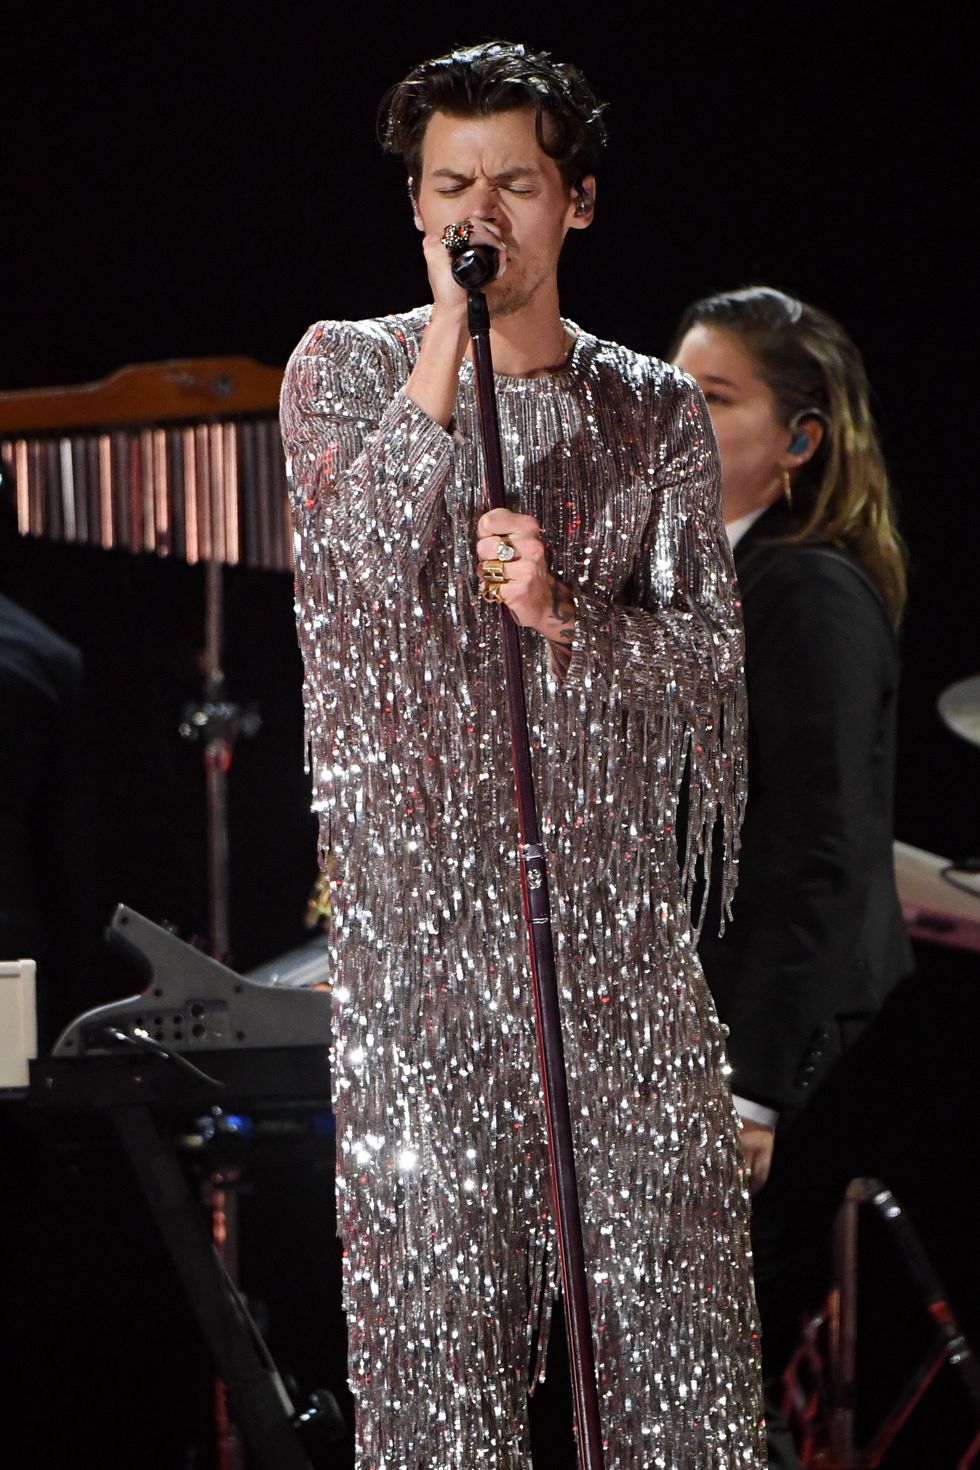 Watch Harry Styles Dance in Silver Fringe While Performing "As It Was